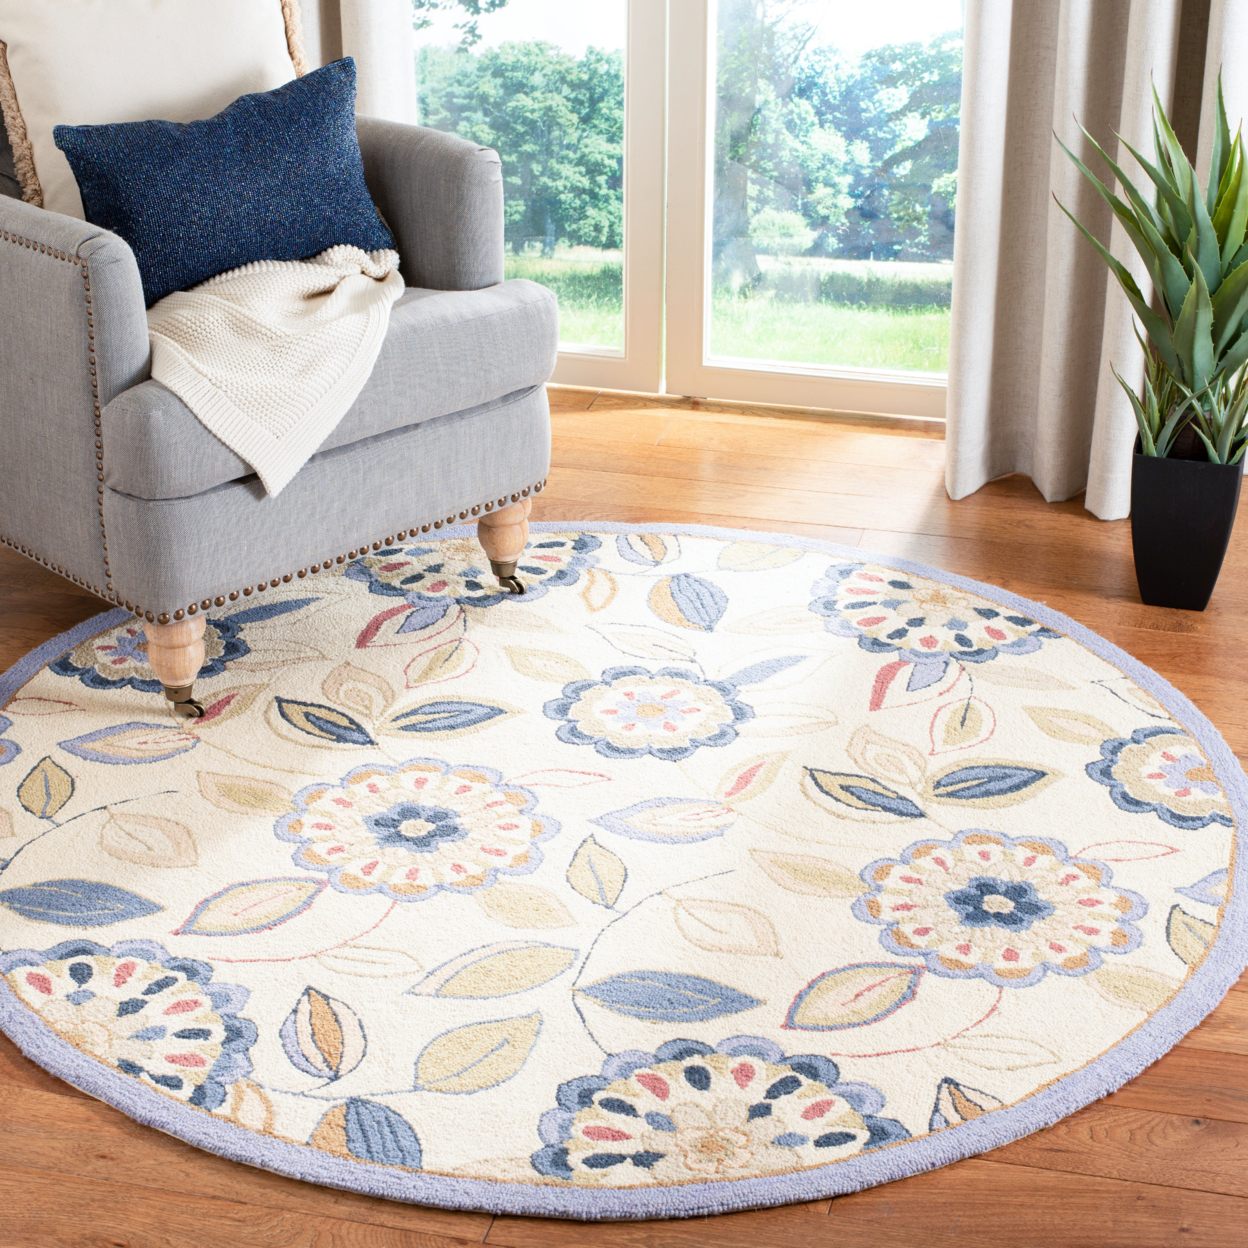 SAFAVIEH Chelsea HK179A Hand-hooked Ivory / Blue Rug - 2' 6 X 12'